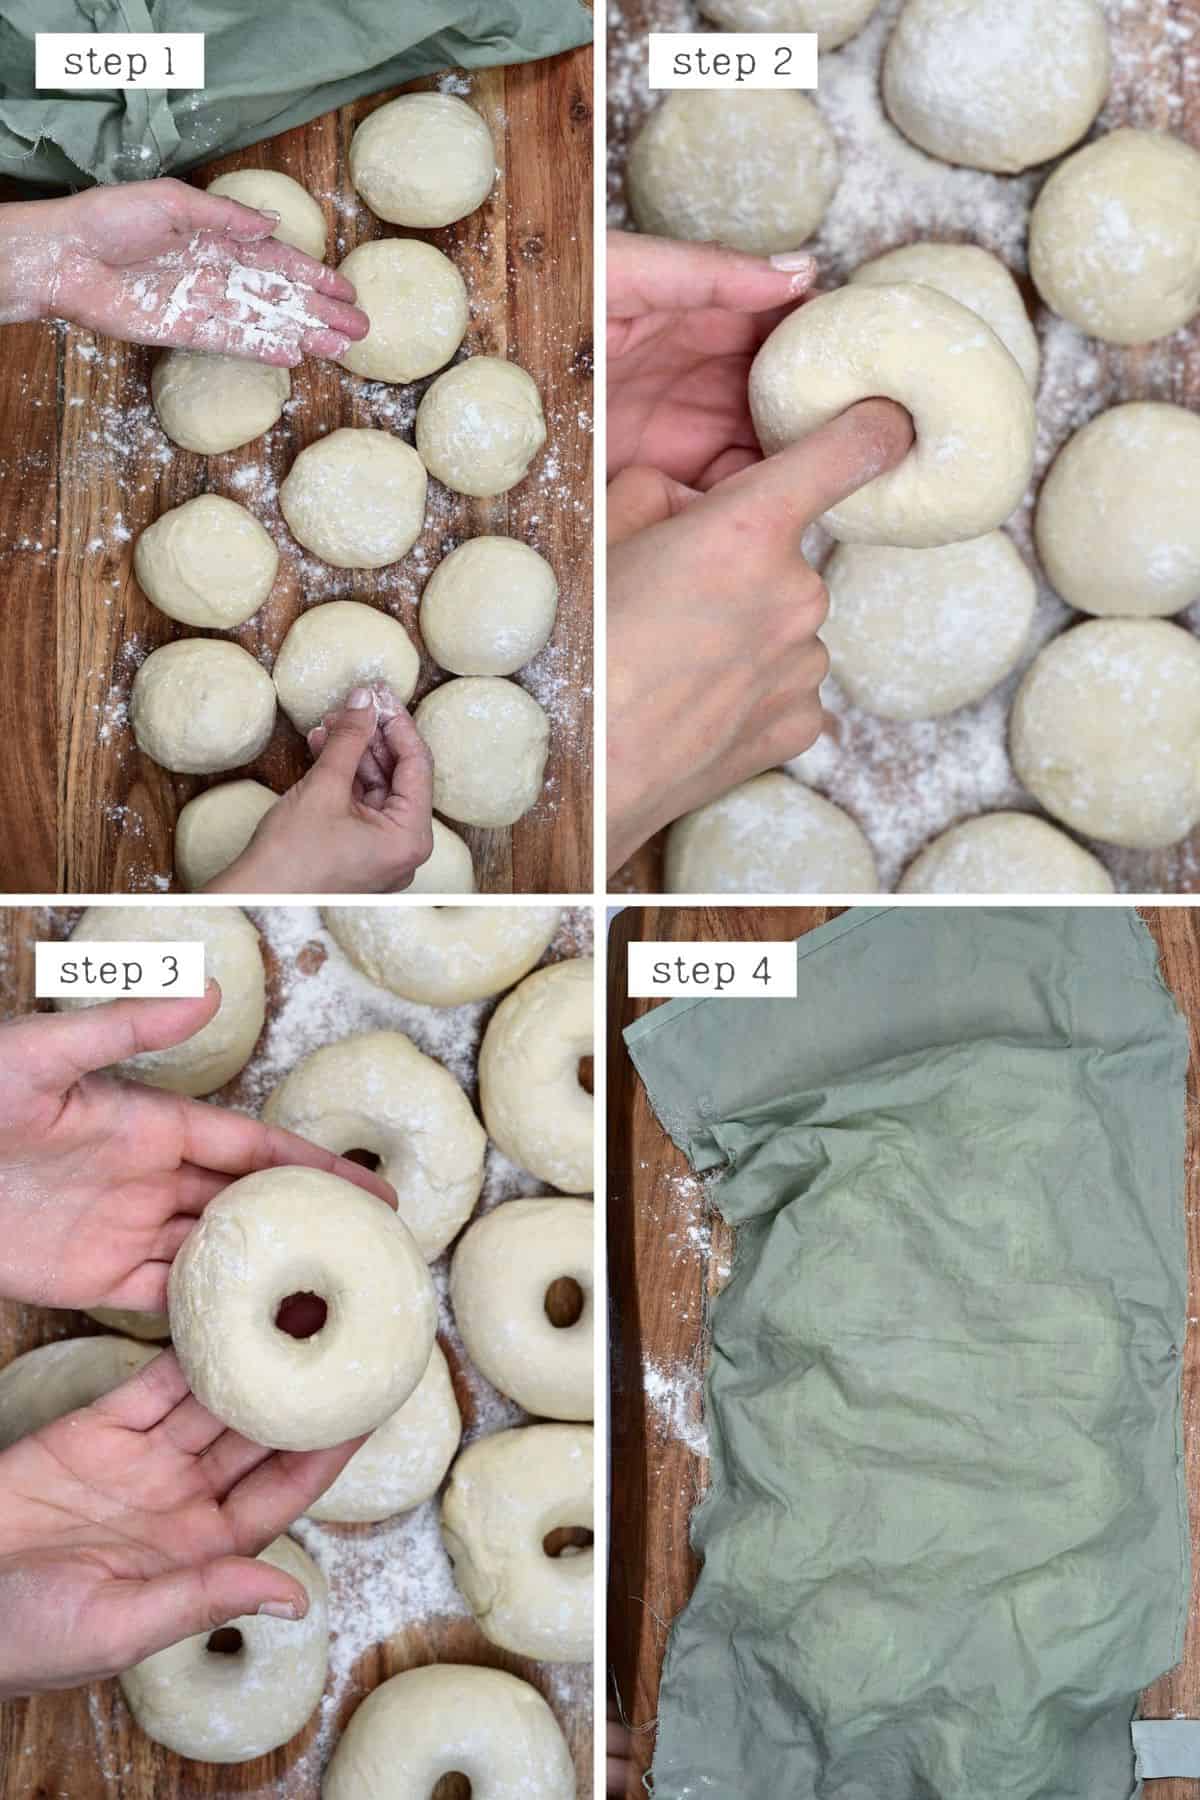 Steps for shaping dough balls into bagels with holes